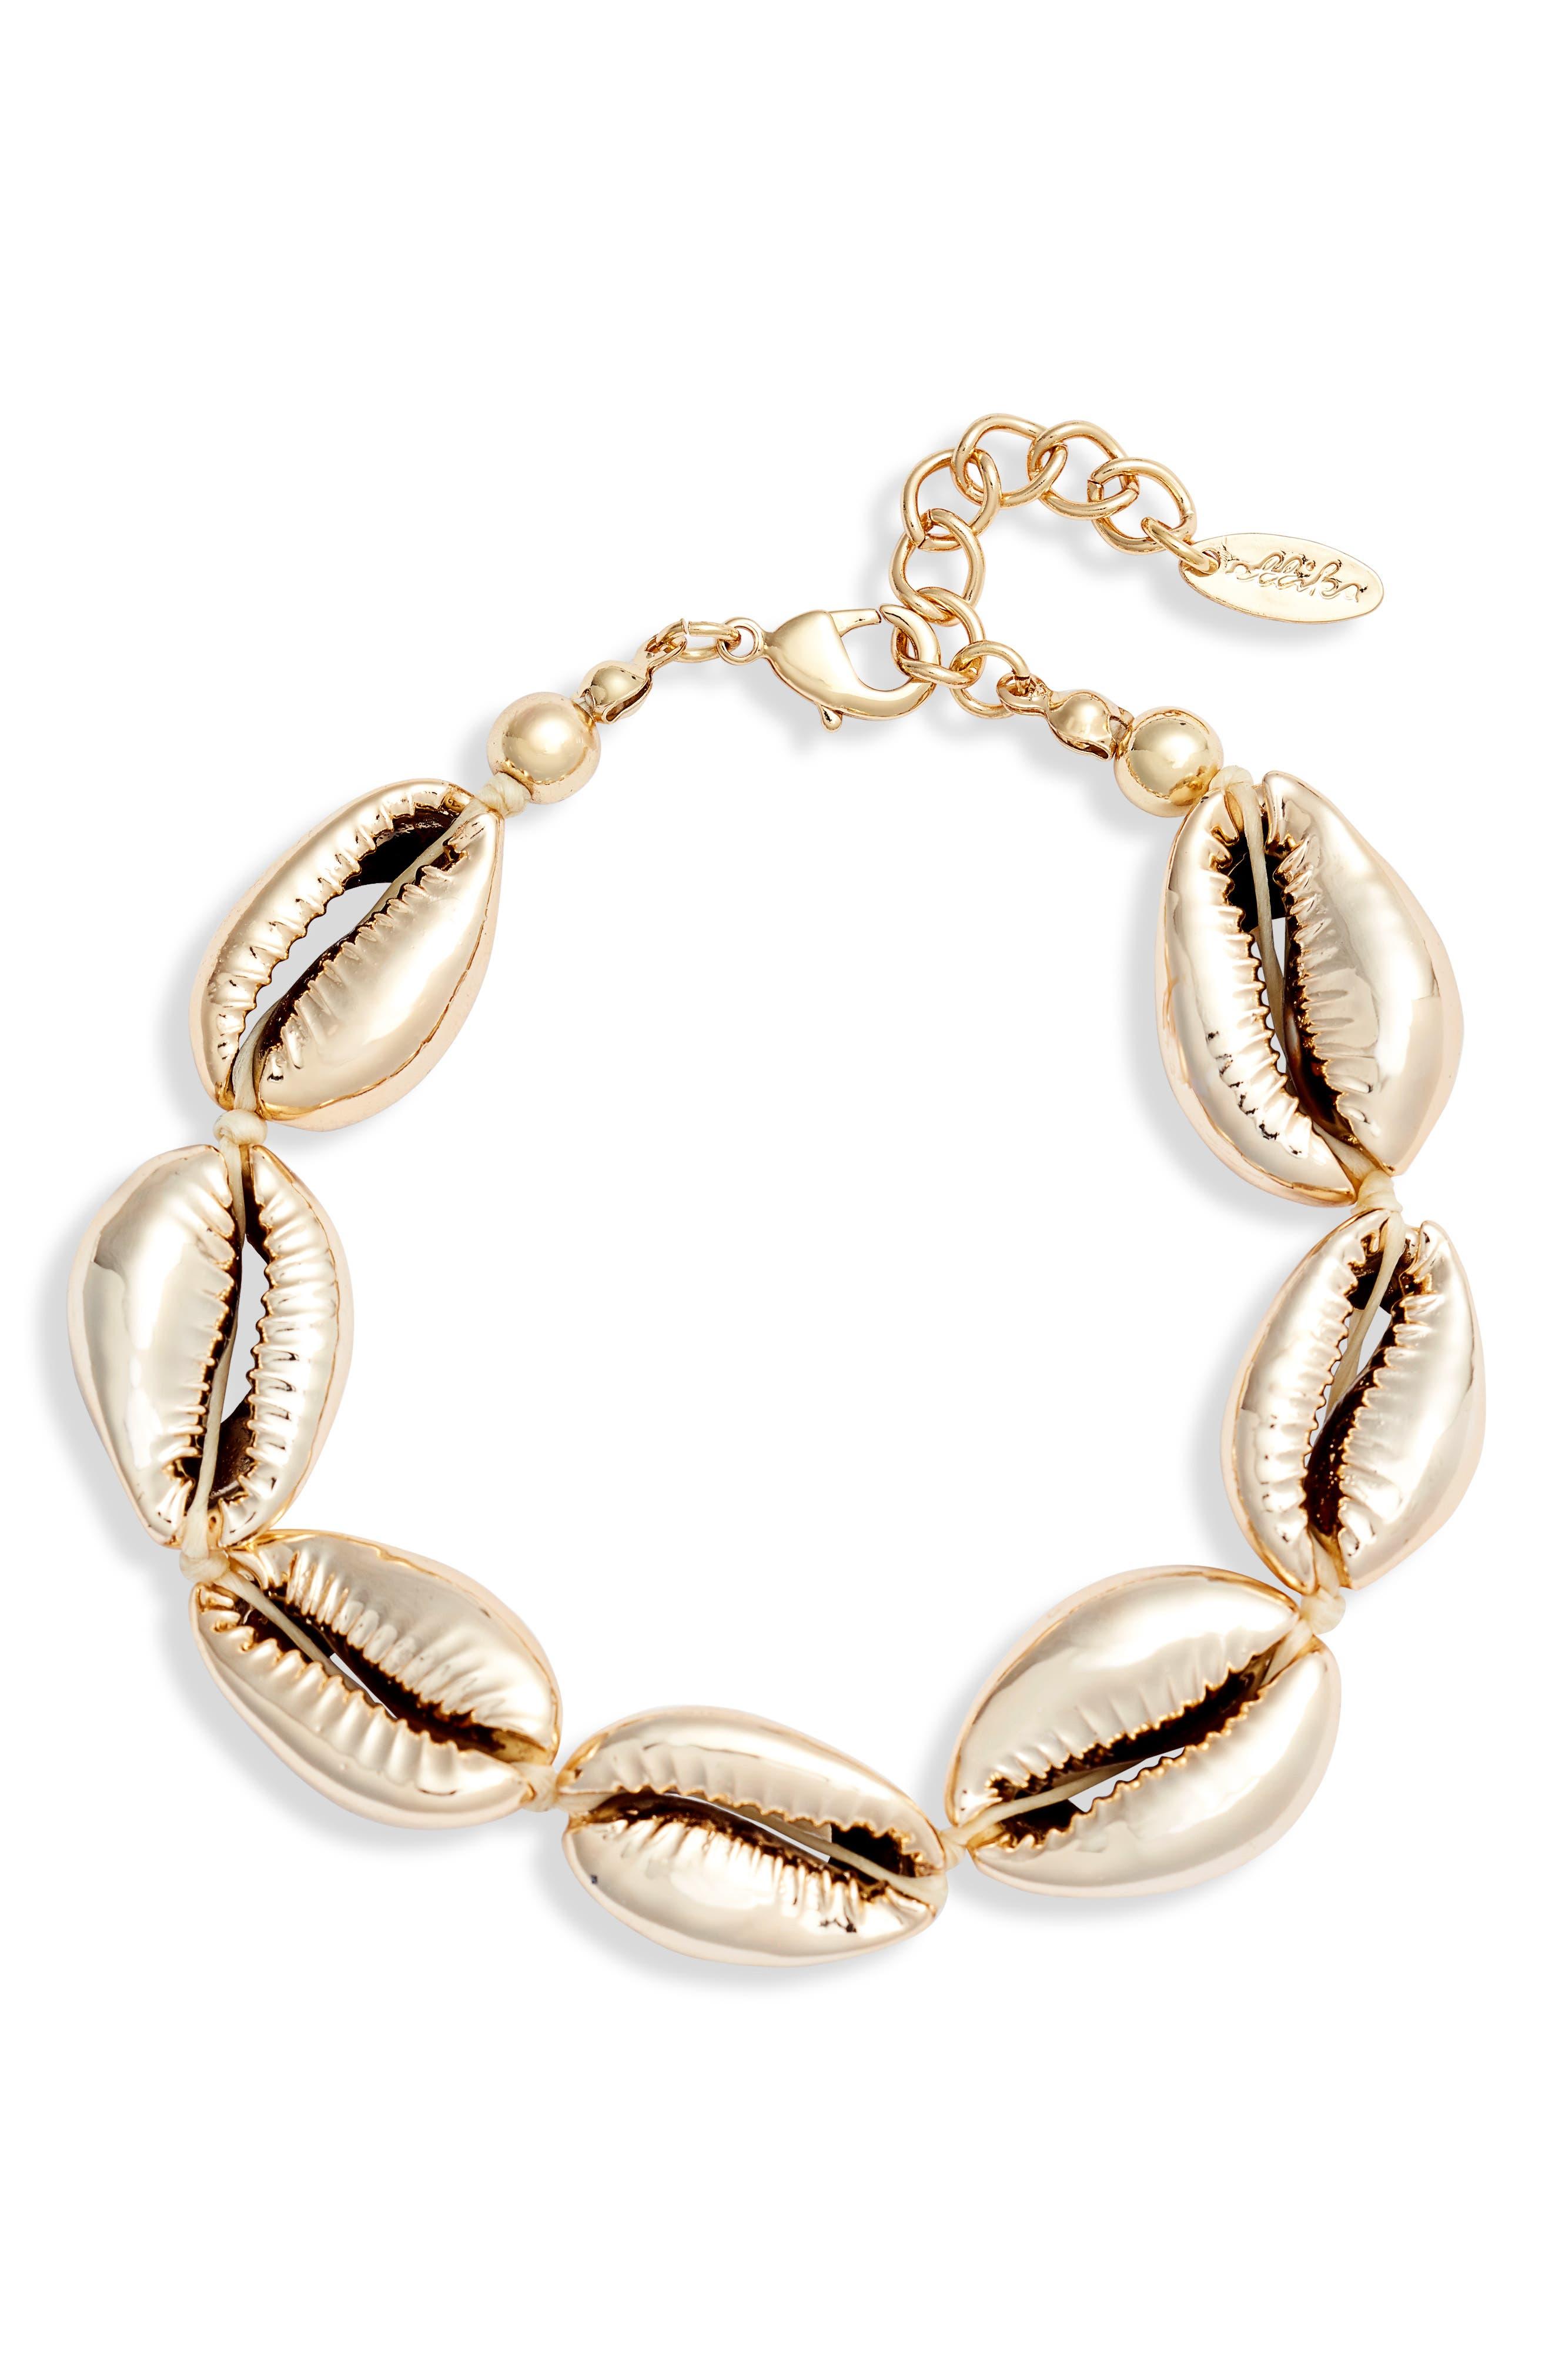 Gold Cowrie Shell Bracelet With Hand Painted Enameled Shells - Etsy |  Jewelry accessories ideas, Diy earrings polymer clay, Shell bracelet